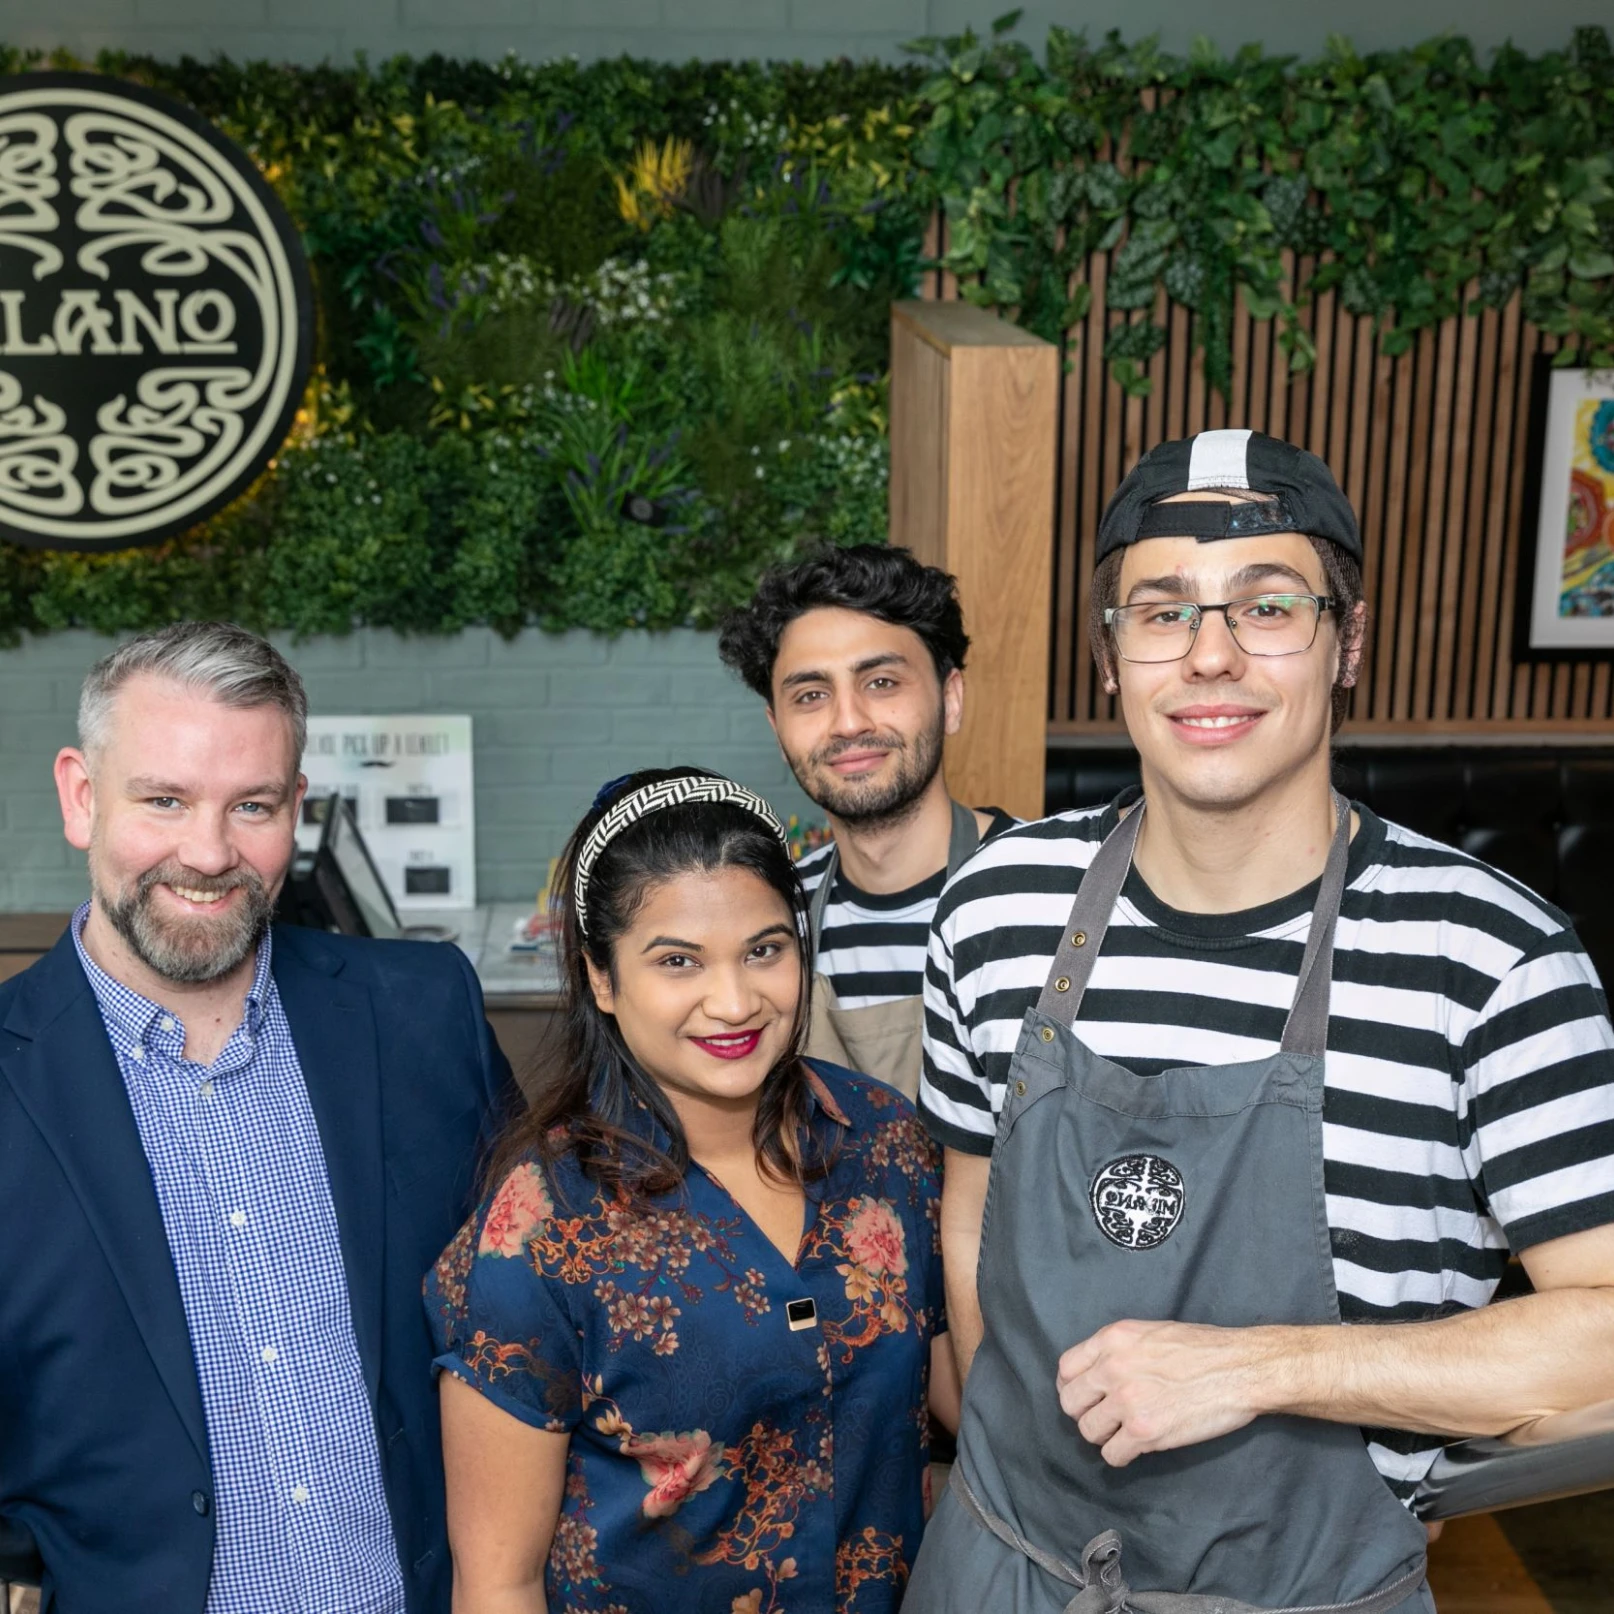 Your marble table awaits:  Milano Dundrum reopens with free pizza giveaway to celebrate its striking new look